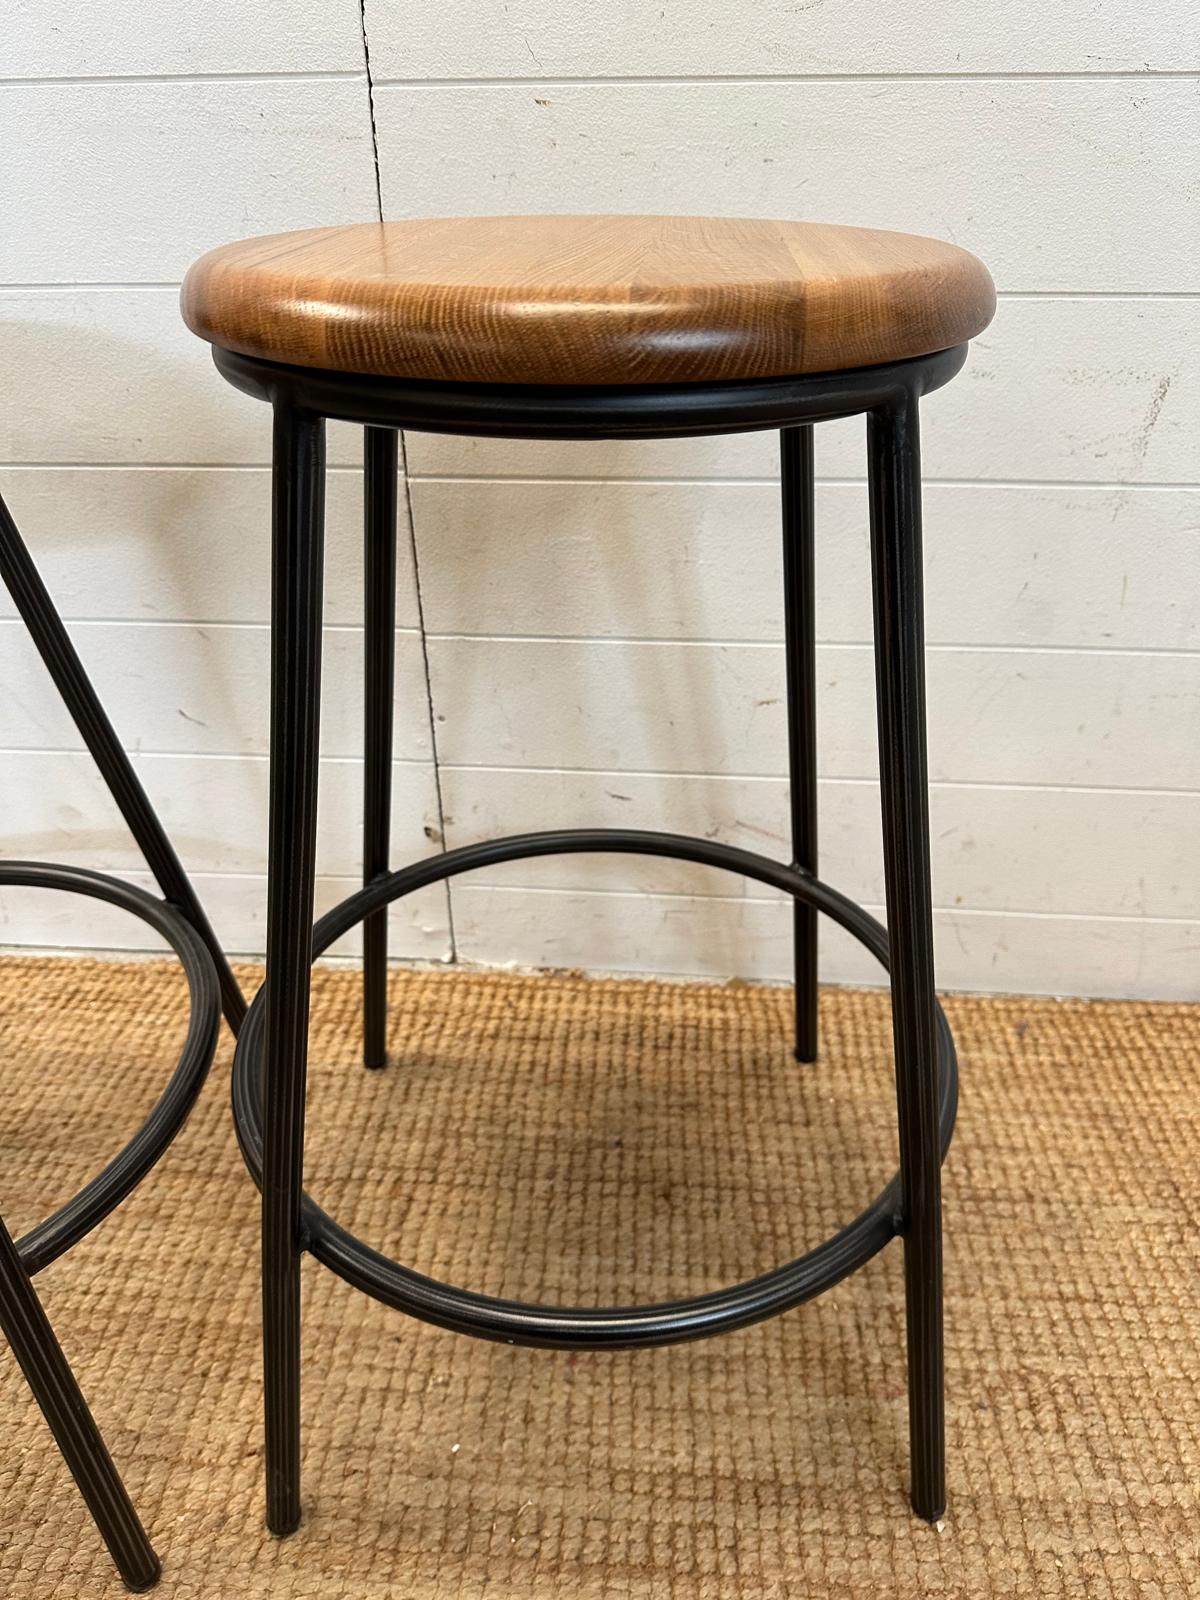 A pair of industrial style bar stools with wooden seats (H66cm) - Image 2 of 3